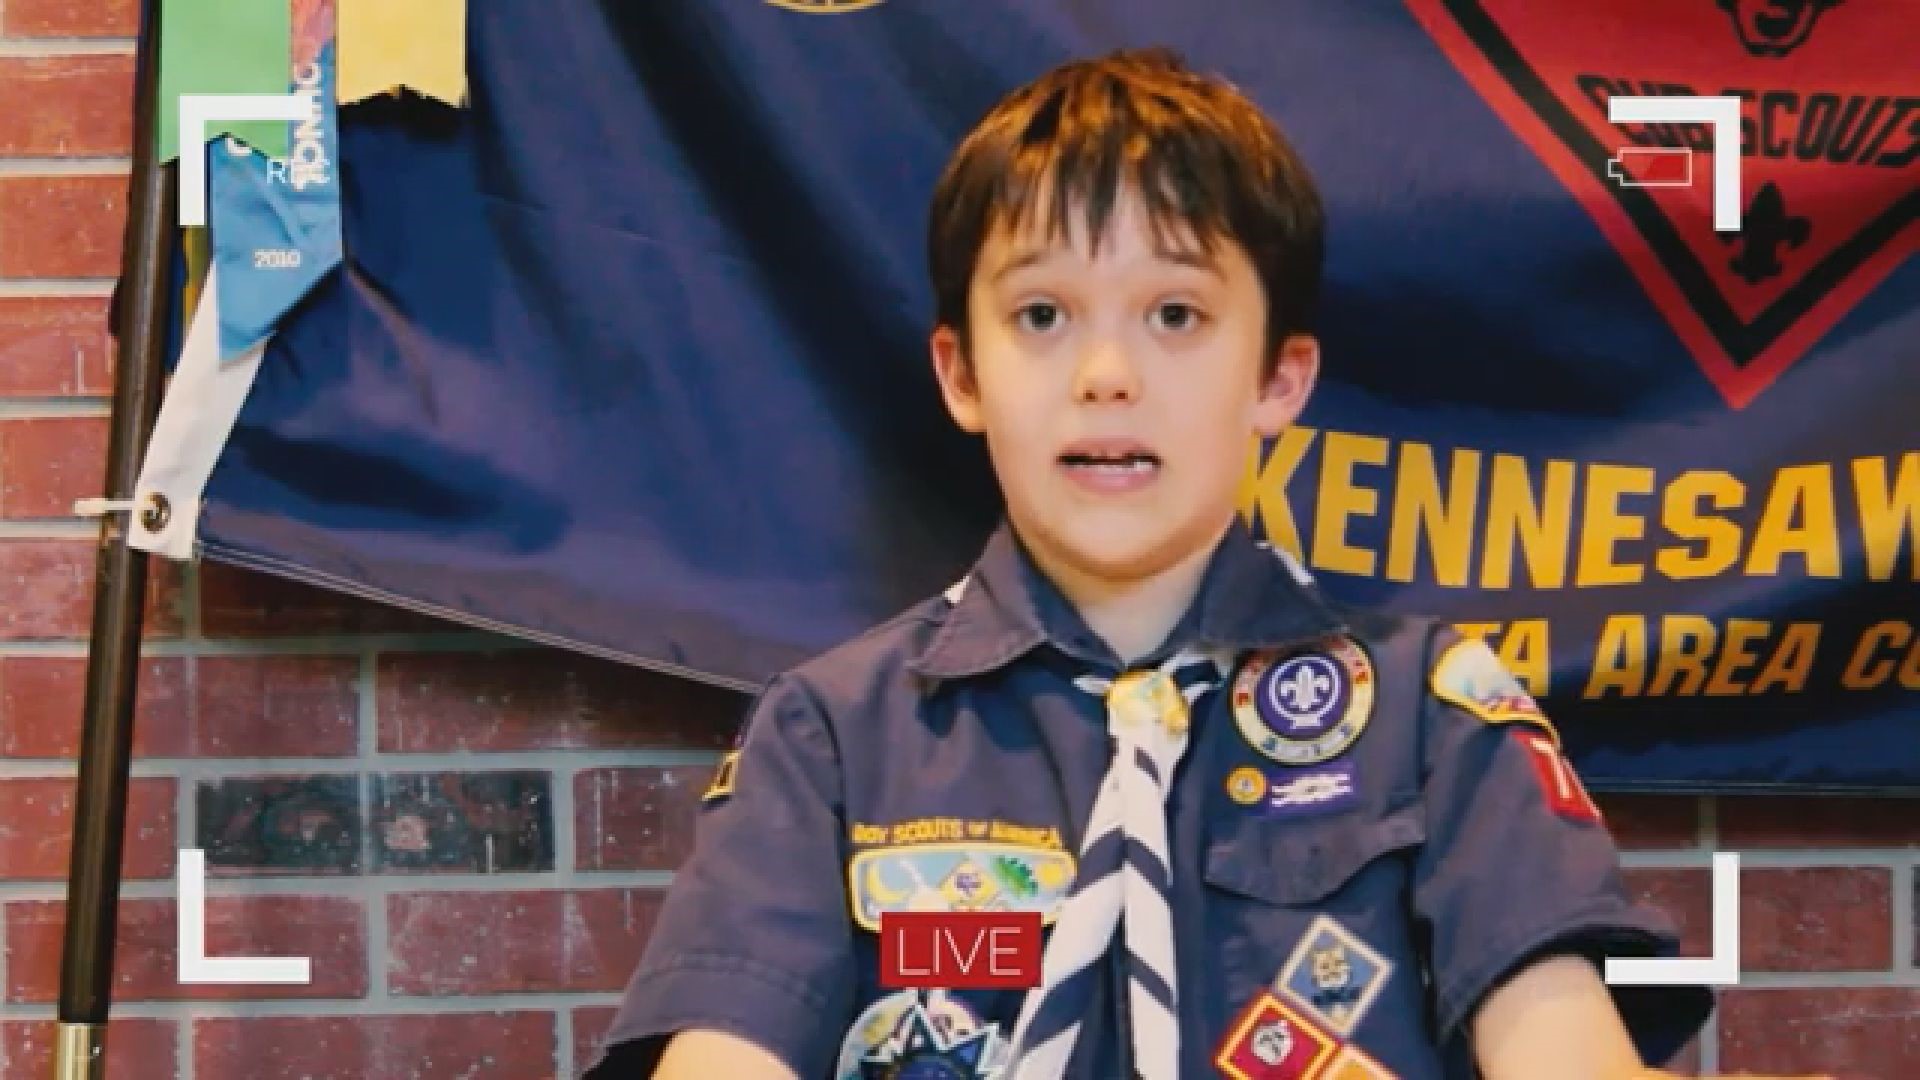 Kennesaw Cub Scouts deliver laughs with 'popcorn shortage' video |  